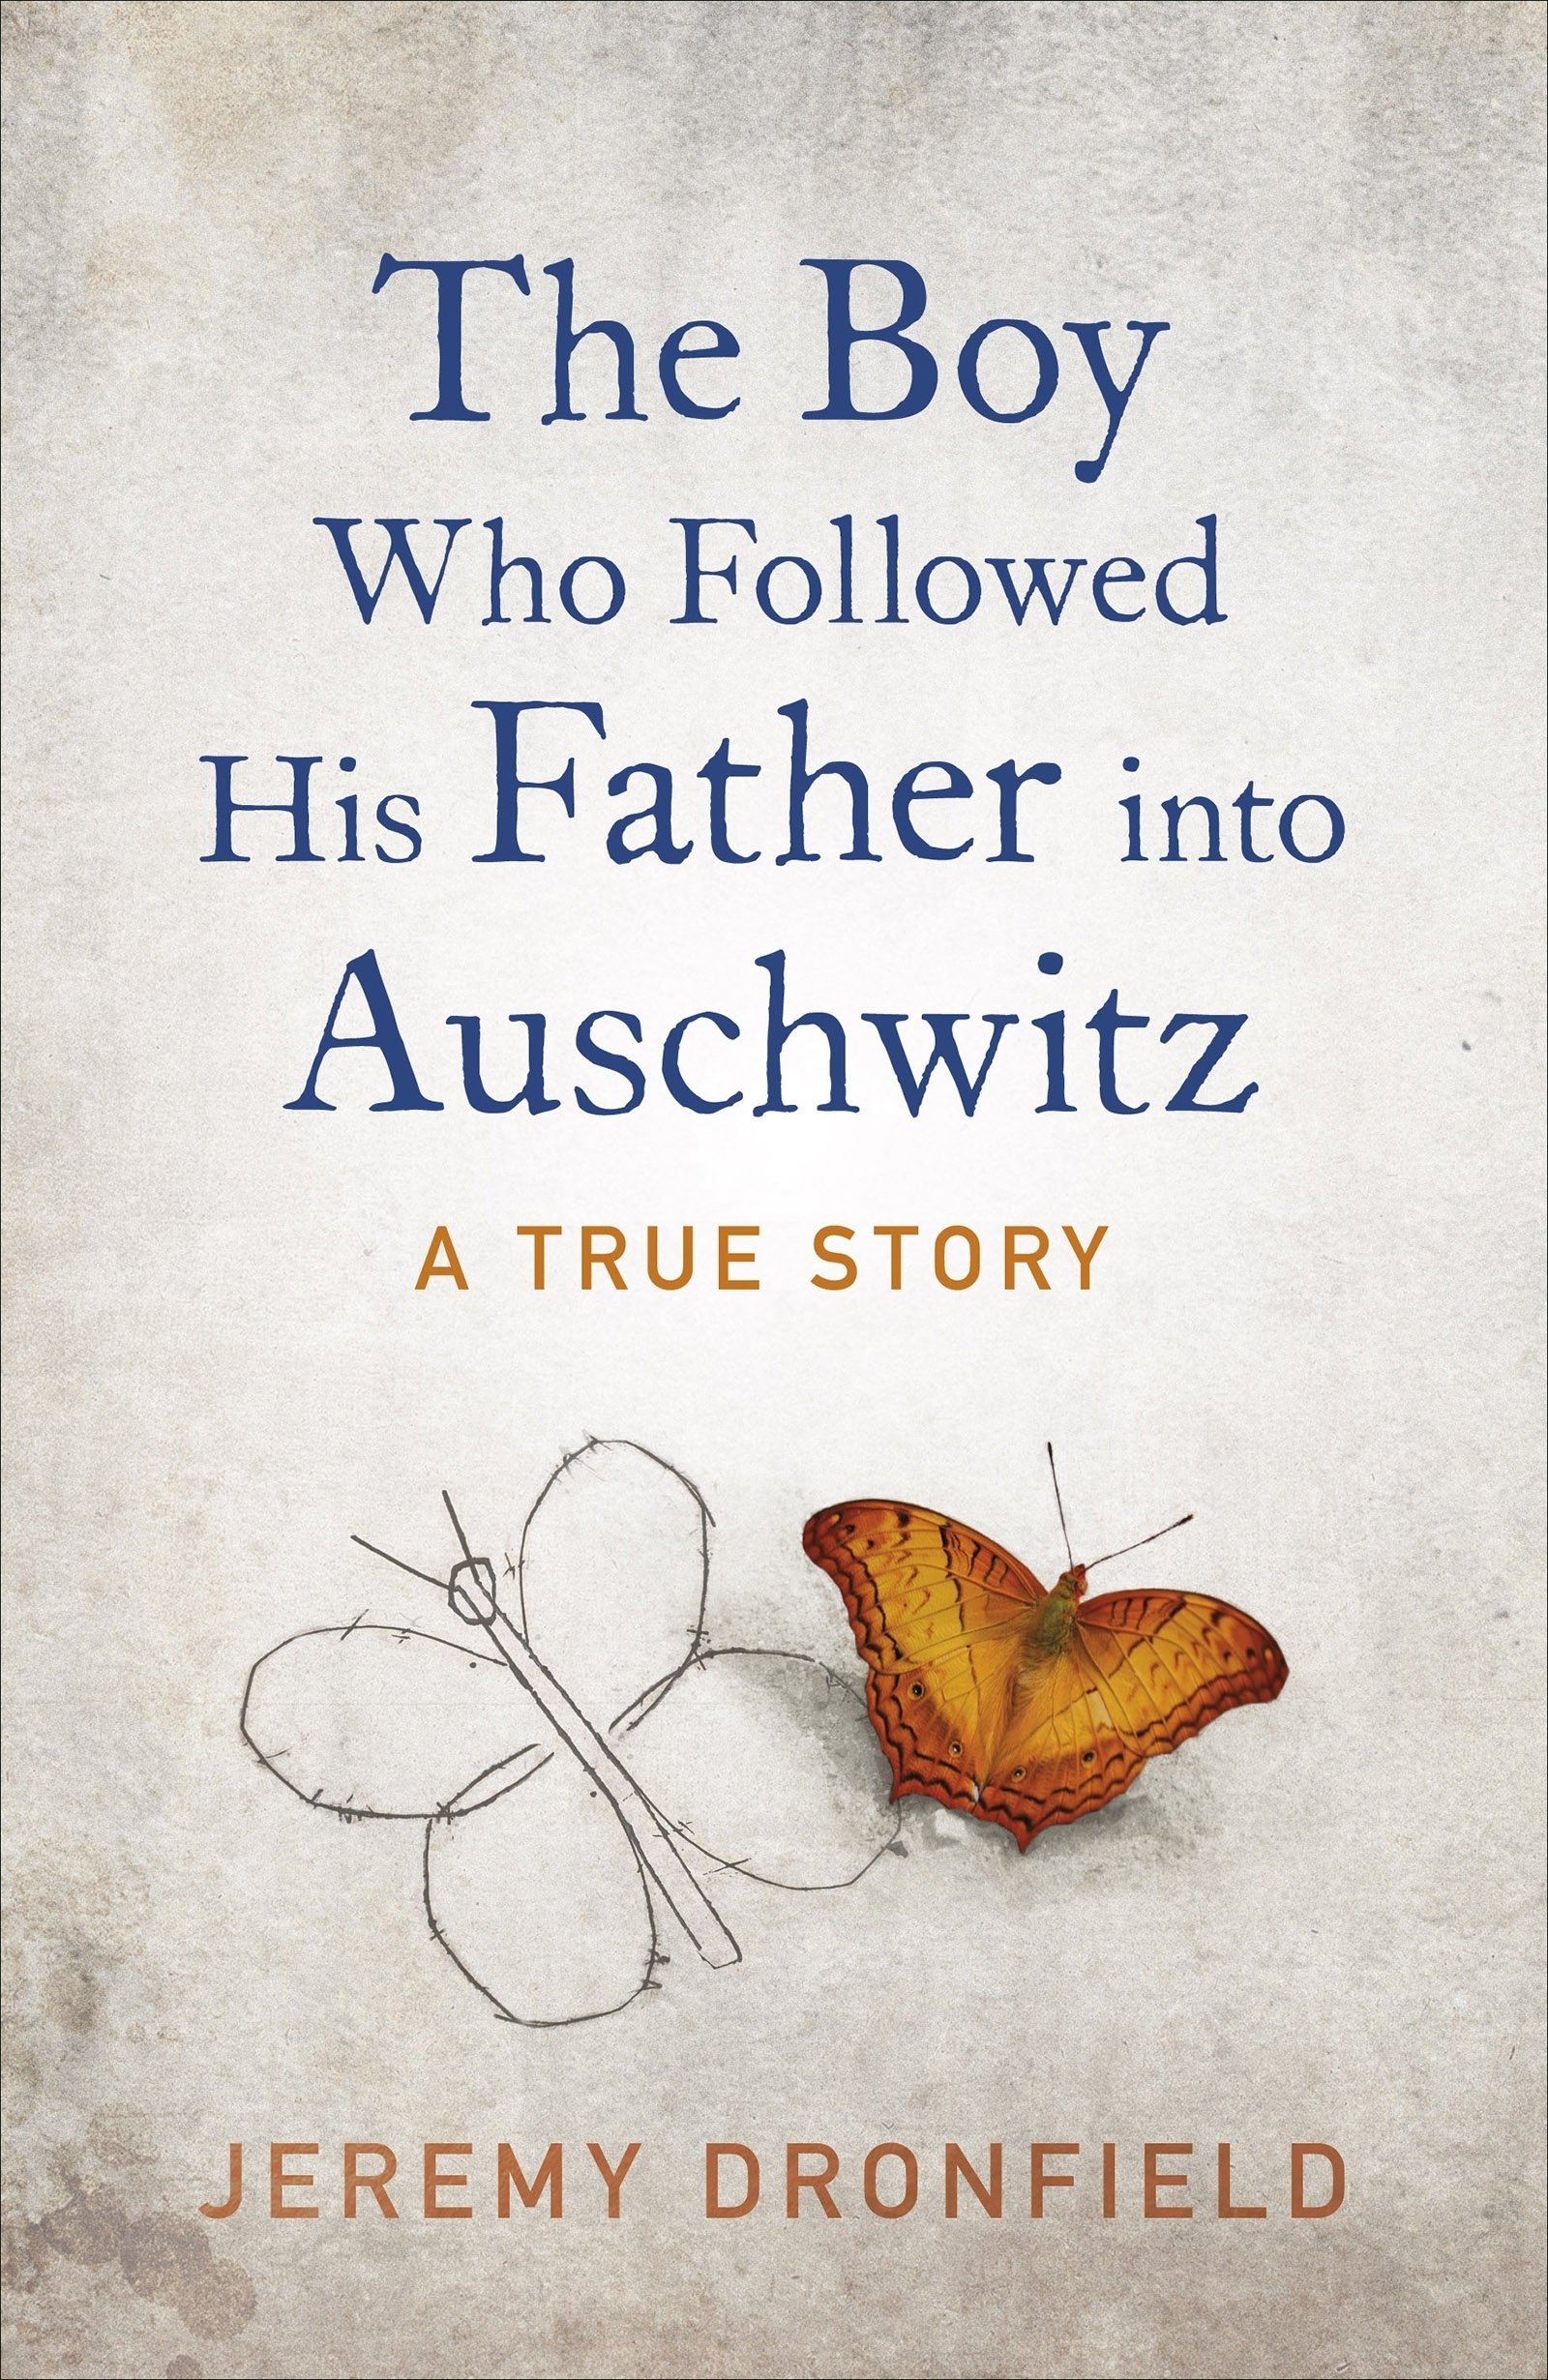 The Boy Who Followed His Father into Auschwitz | Jeremy Dronfield